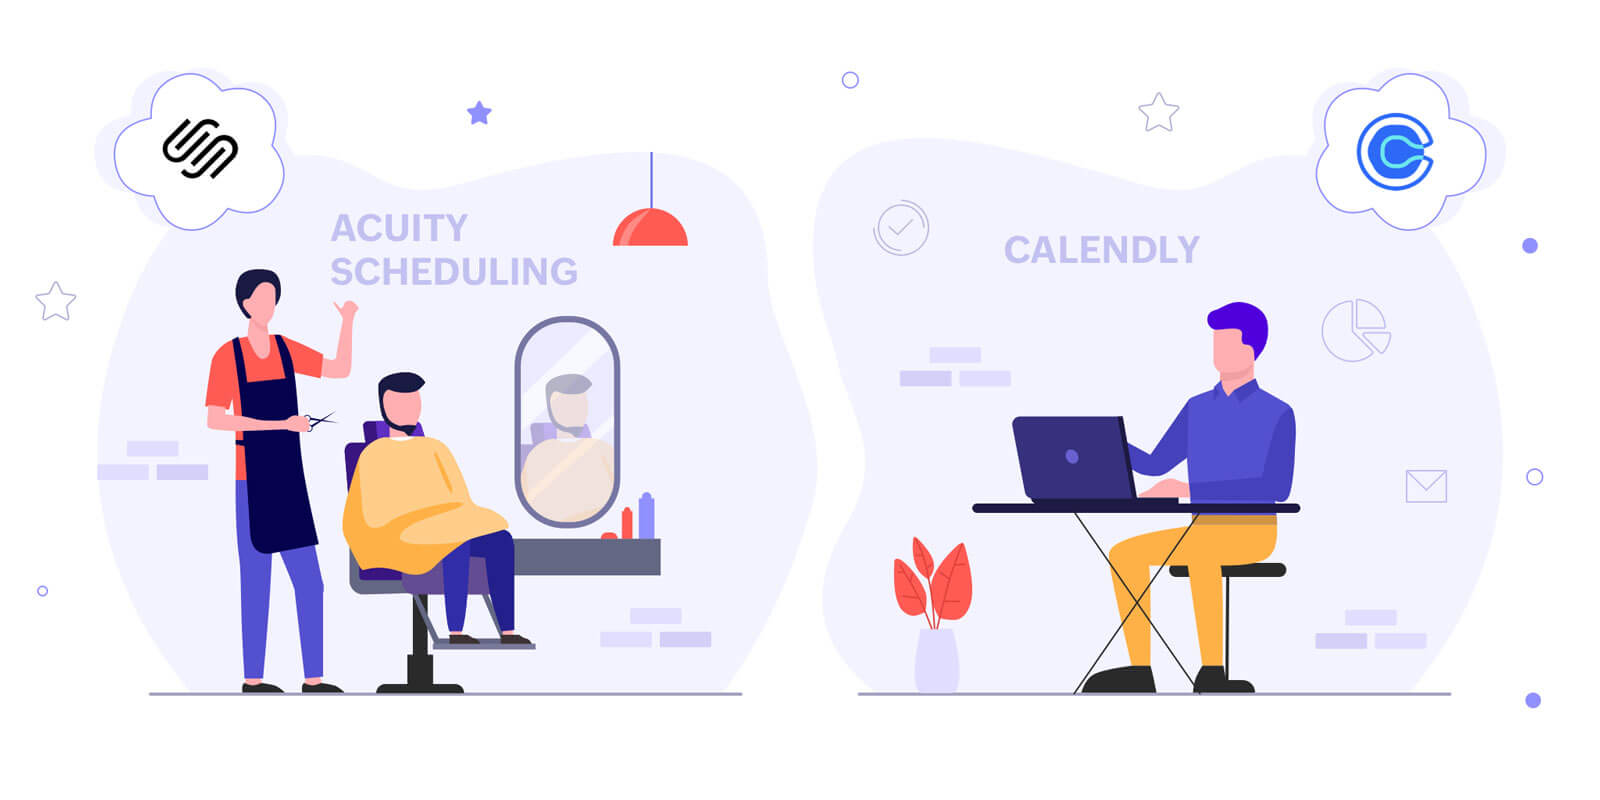 Image alt tag: Calendly vs Acuity Scheduling